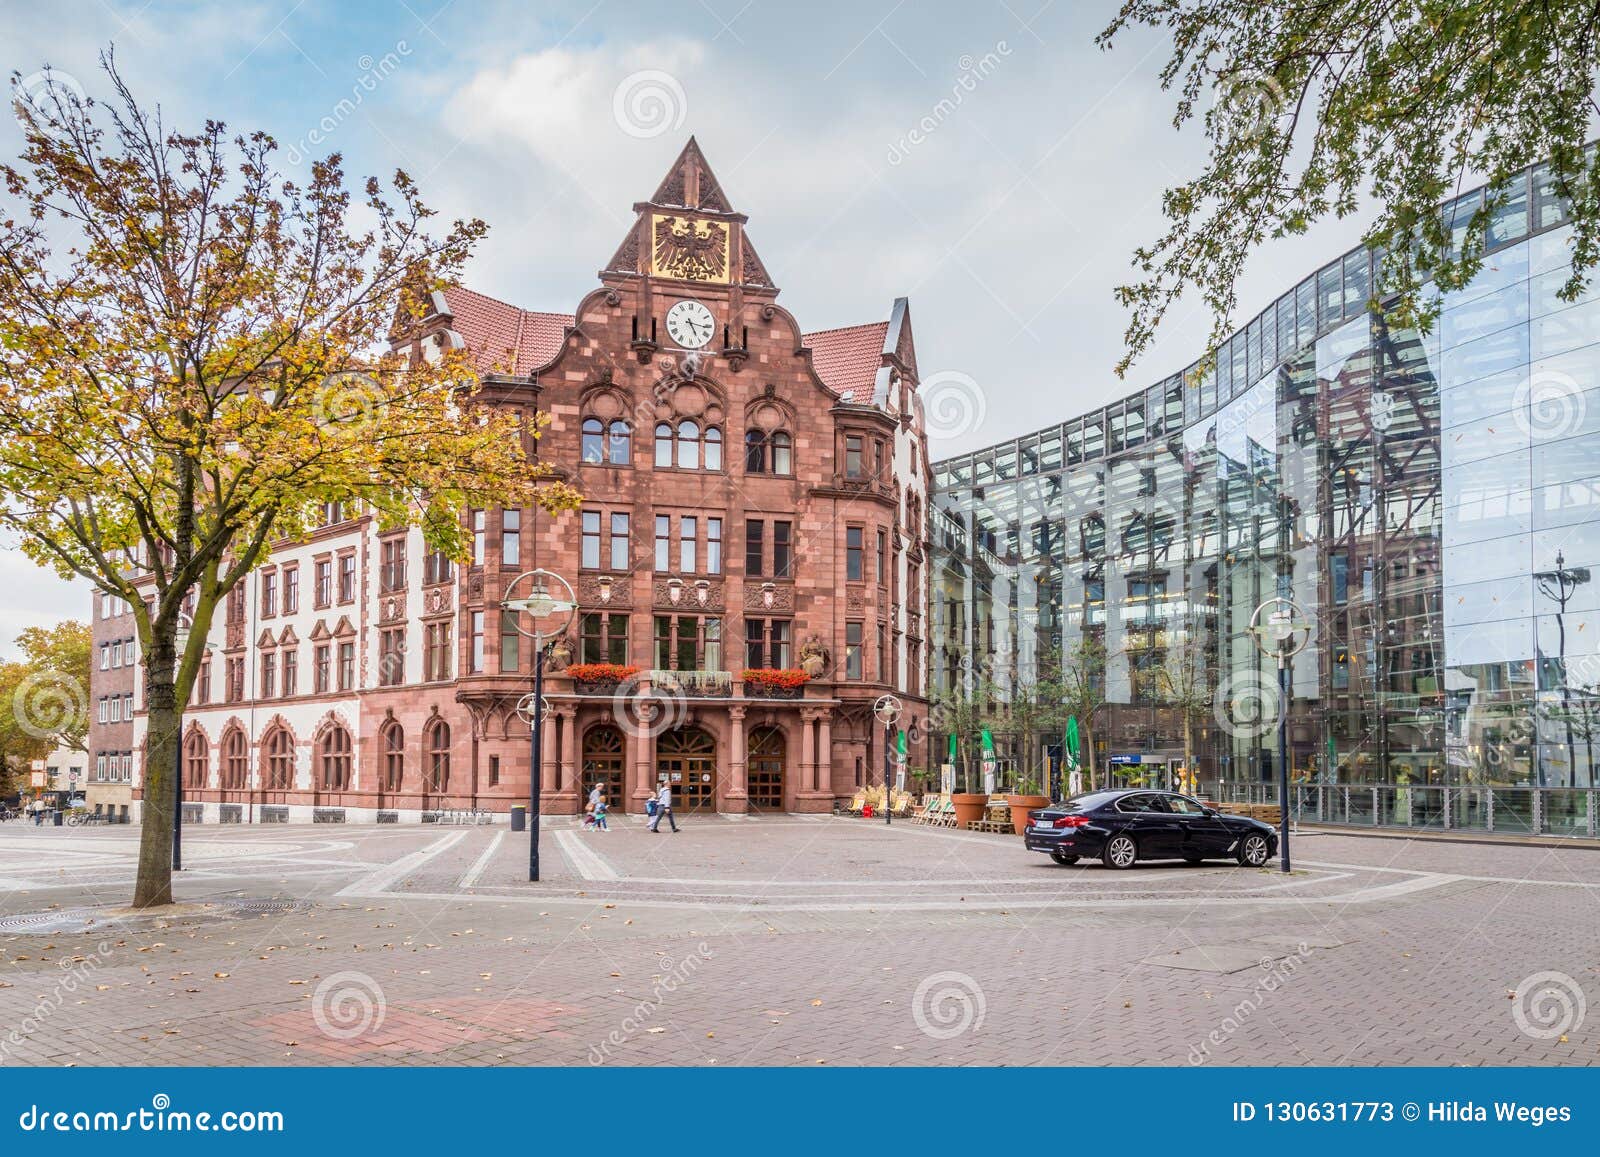 City Hall In Dortmund Germany Editorial Stock Photo Image Of Center German 130631773